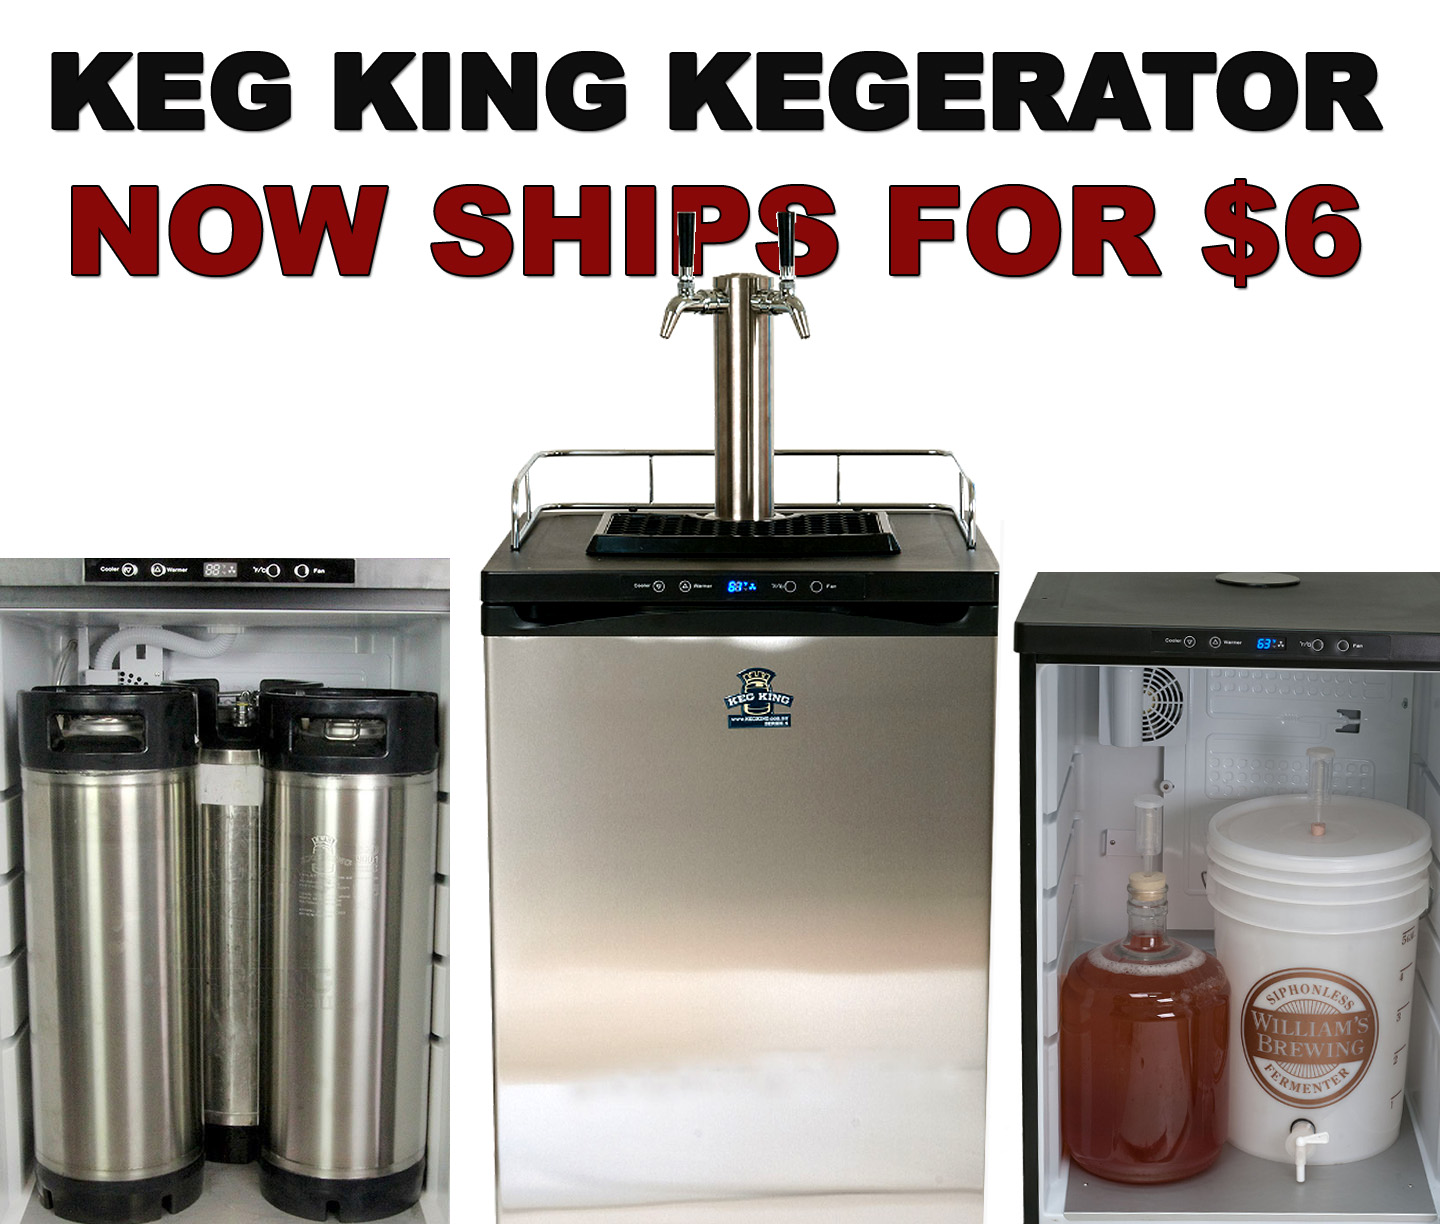  Coupon Code For Get $6.99 Shipping On A New Keg King Kegerator Coupon Code